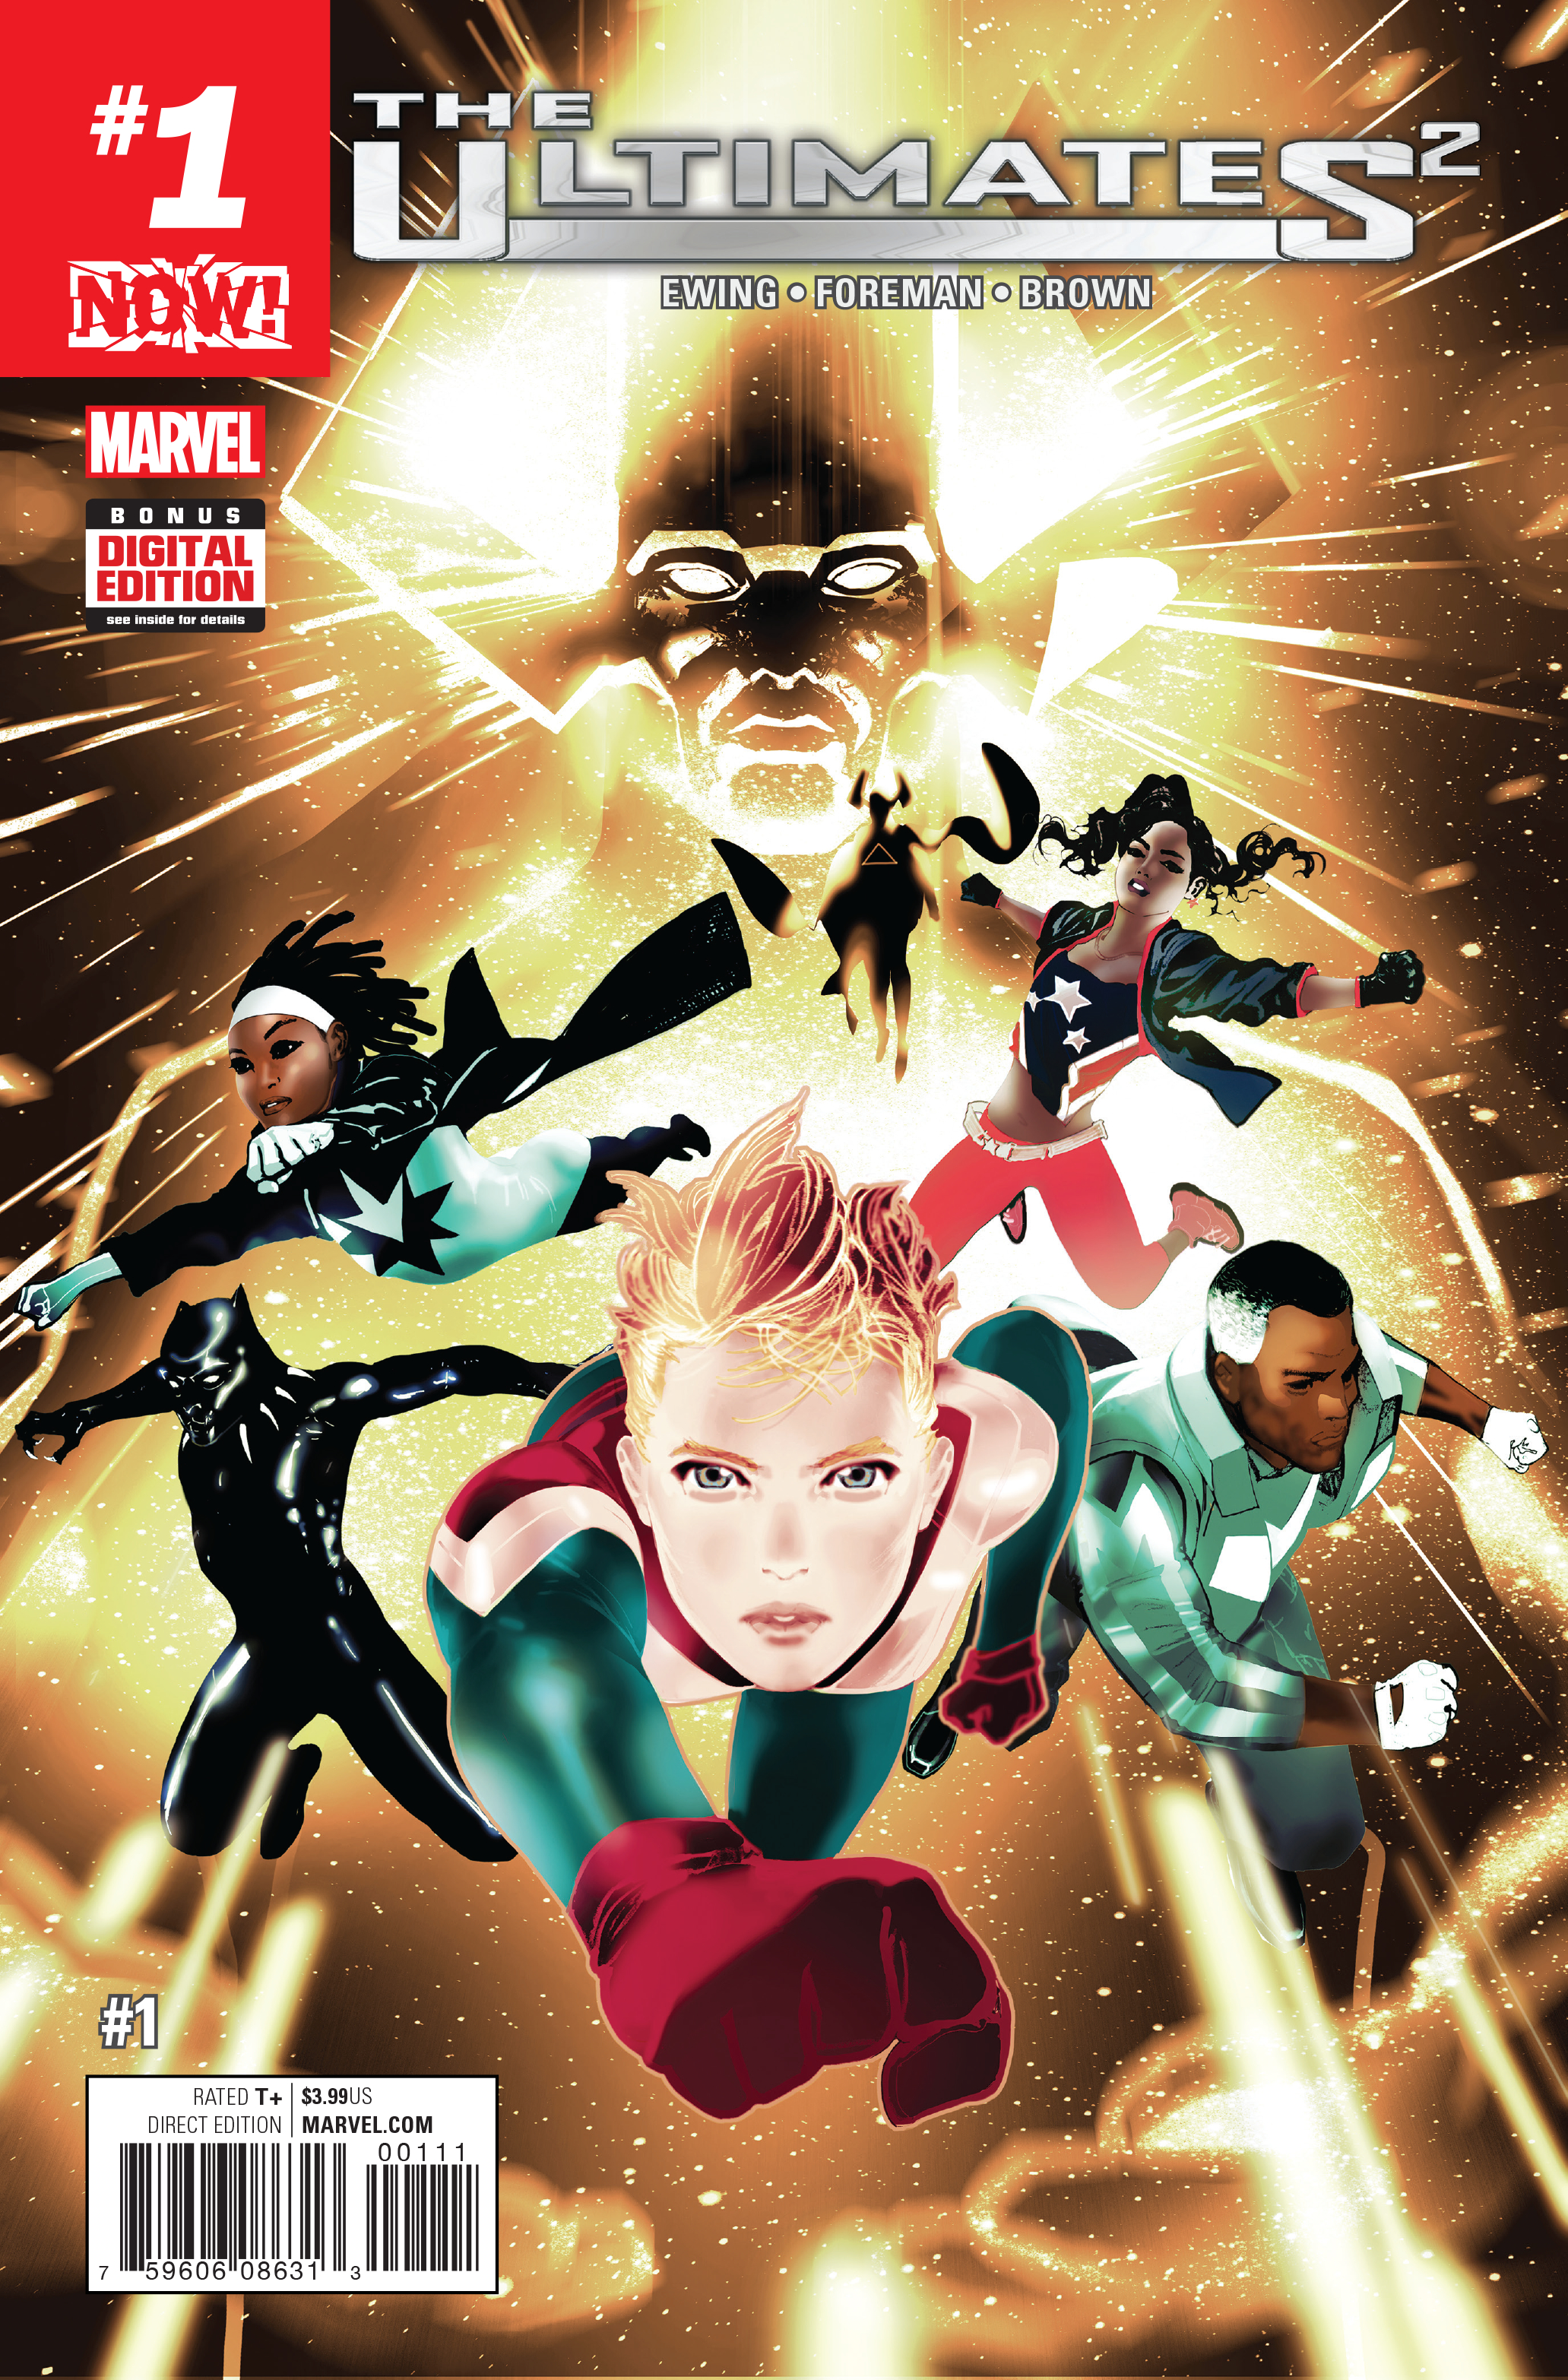 ULTIMATES 2 #1 NOW